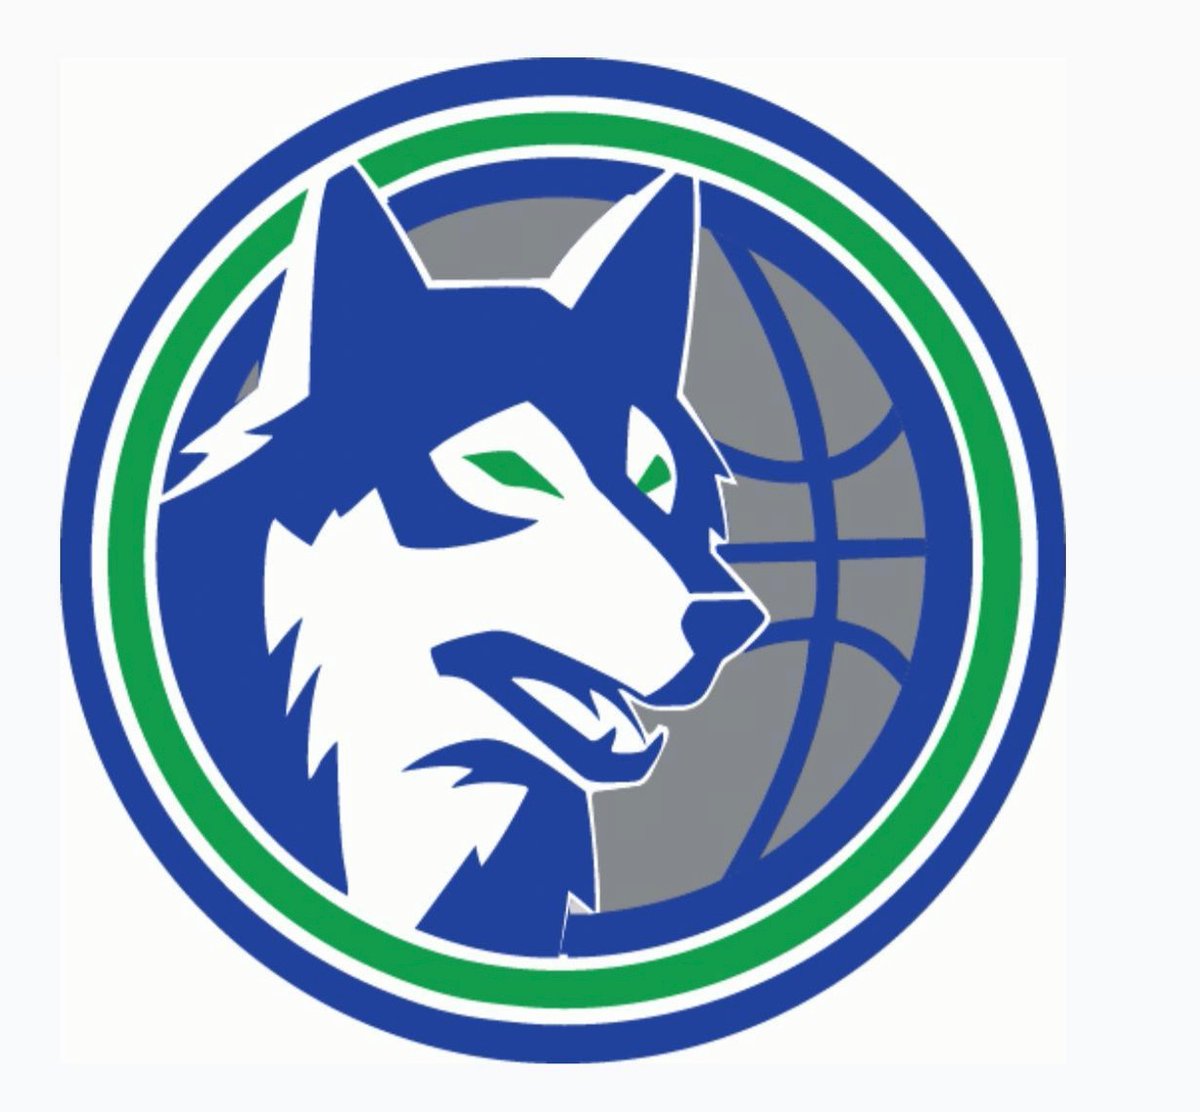 original Timberwolves logo looks like a dog that can’t believe it’s being asked for a divorce